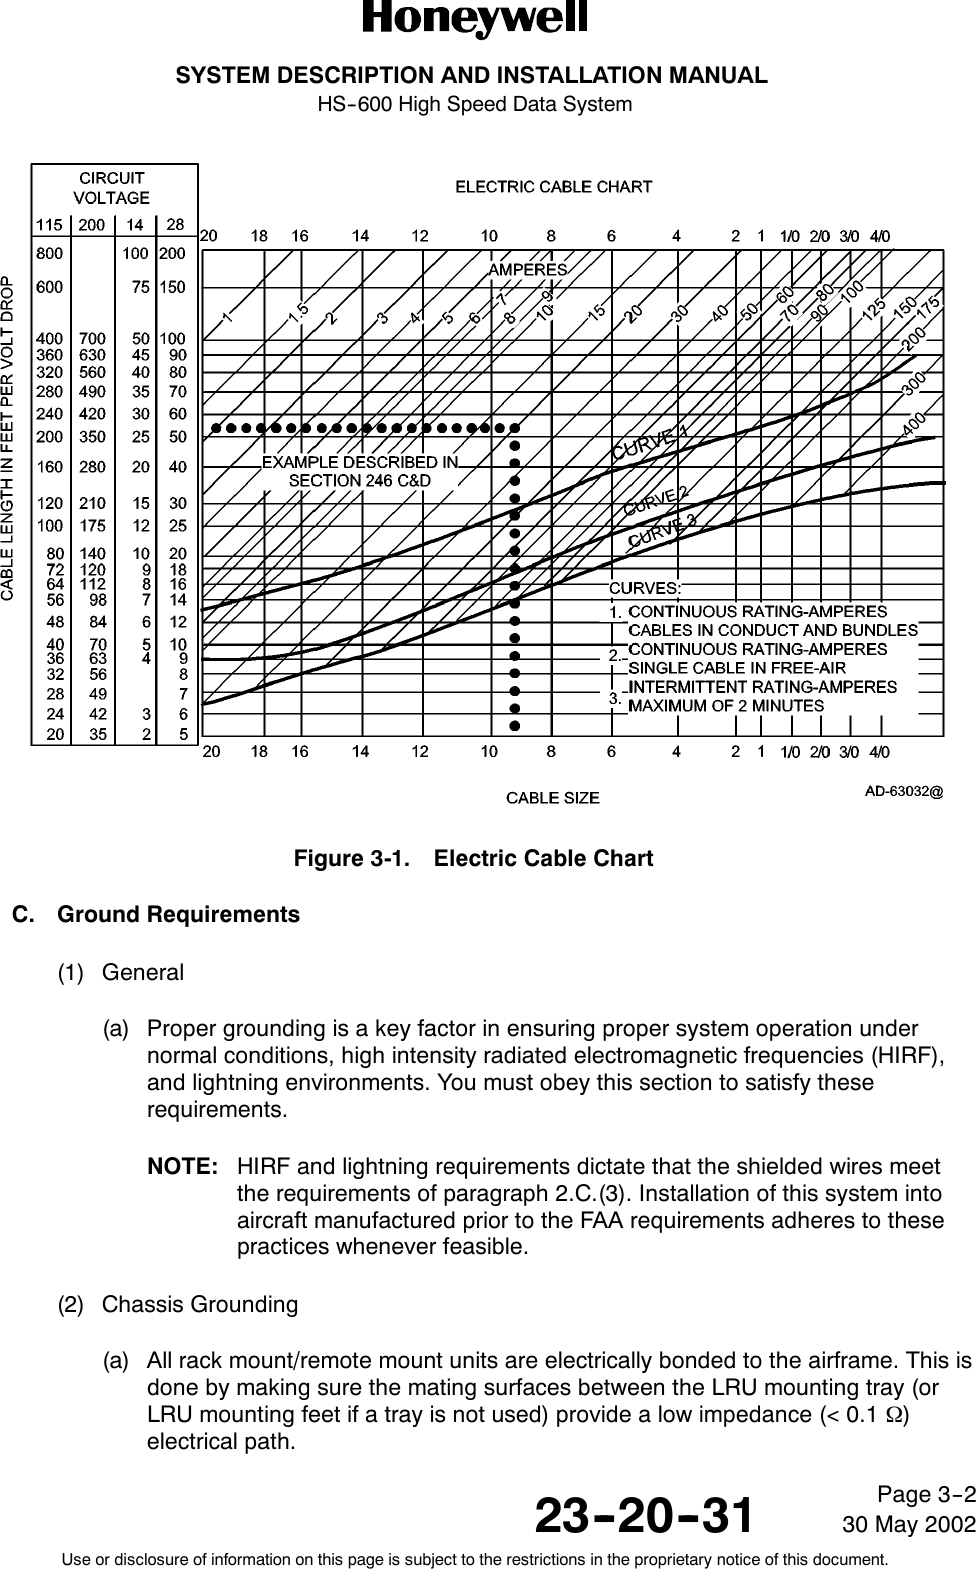 SYSTEM DESCRIPTION AND INSTALLATION MANUALHS--600 High Speed Data System23--20--3130 May 2002Use or disclosure of information on this page is subject to the restrictions in the proprietary notice of this document.Page 3--2Figure 3-1. Electric Cable ChartC. Ground Requirements(1) General(a) Proper grounding is a key factor in ensuring proper system operation undernormal conditions, high intensity radiated electromagnetic frequencies (HIRF),and lightning environments. You must obey this section to satisfy theserequirements.NOTE: HIRF and lightning requirements dictate that the shielded wires meetthe requirements of paragraph 2.C.(3). Installation of this system intoaircraft manufactured prior to the FAA requirements adheres to thesepractices whenever feasible.(2) Chassis Grounding(a) All rack mount/remote mount units are electrically bonded to the airframe. This isdone by making sure the mating surfaces between the LRU mounting tray (orLRU mounting feet if a tray is not used) provide a low impedance (&lt; 0.1 Ω)electrical path.